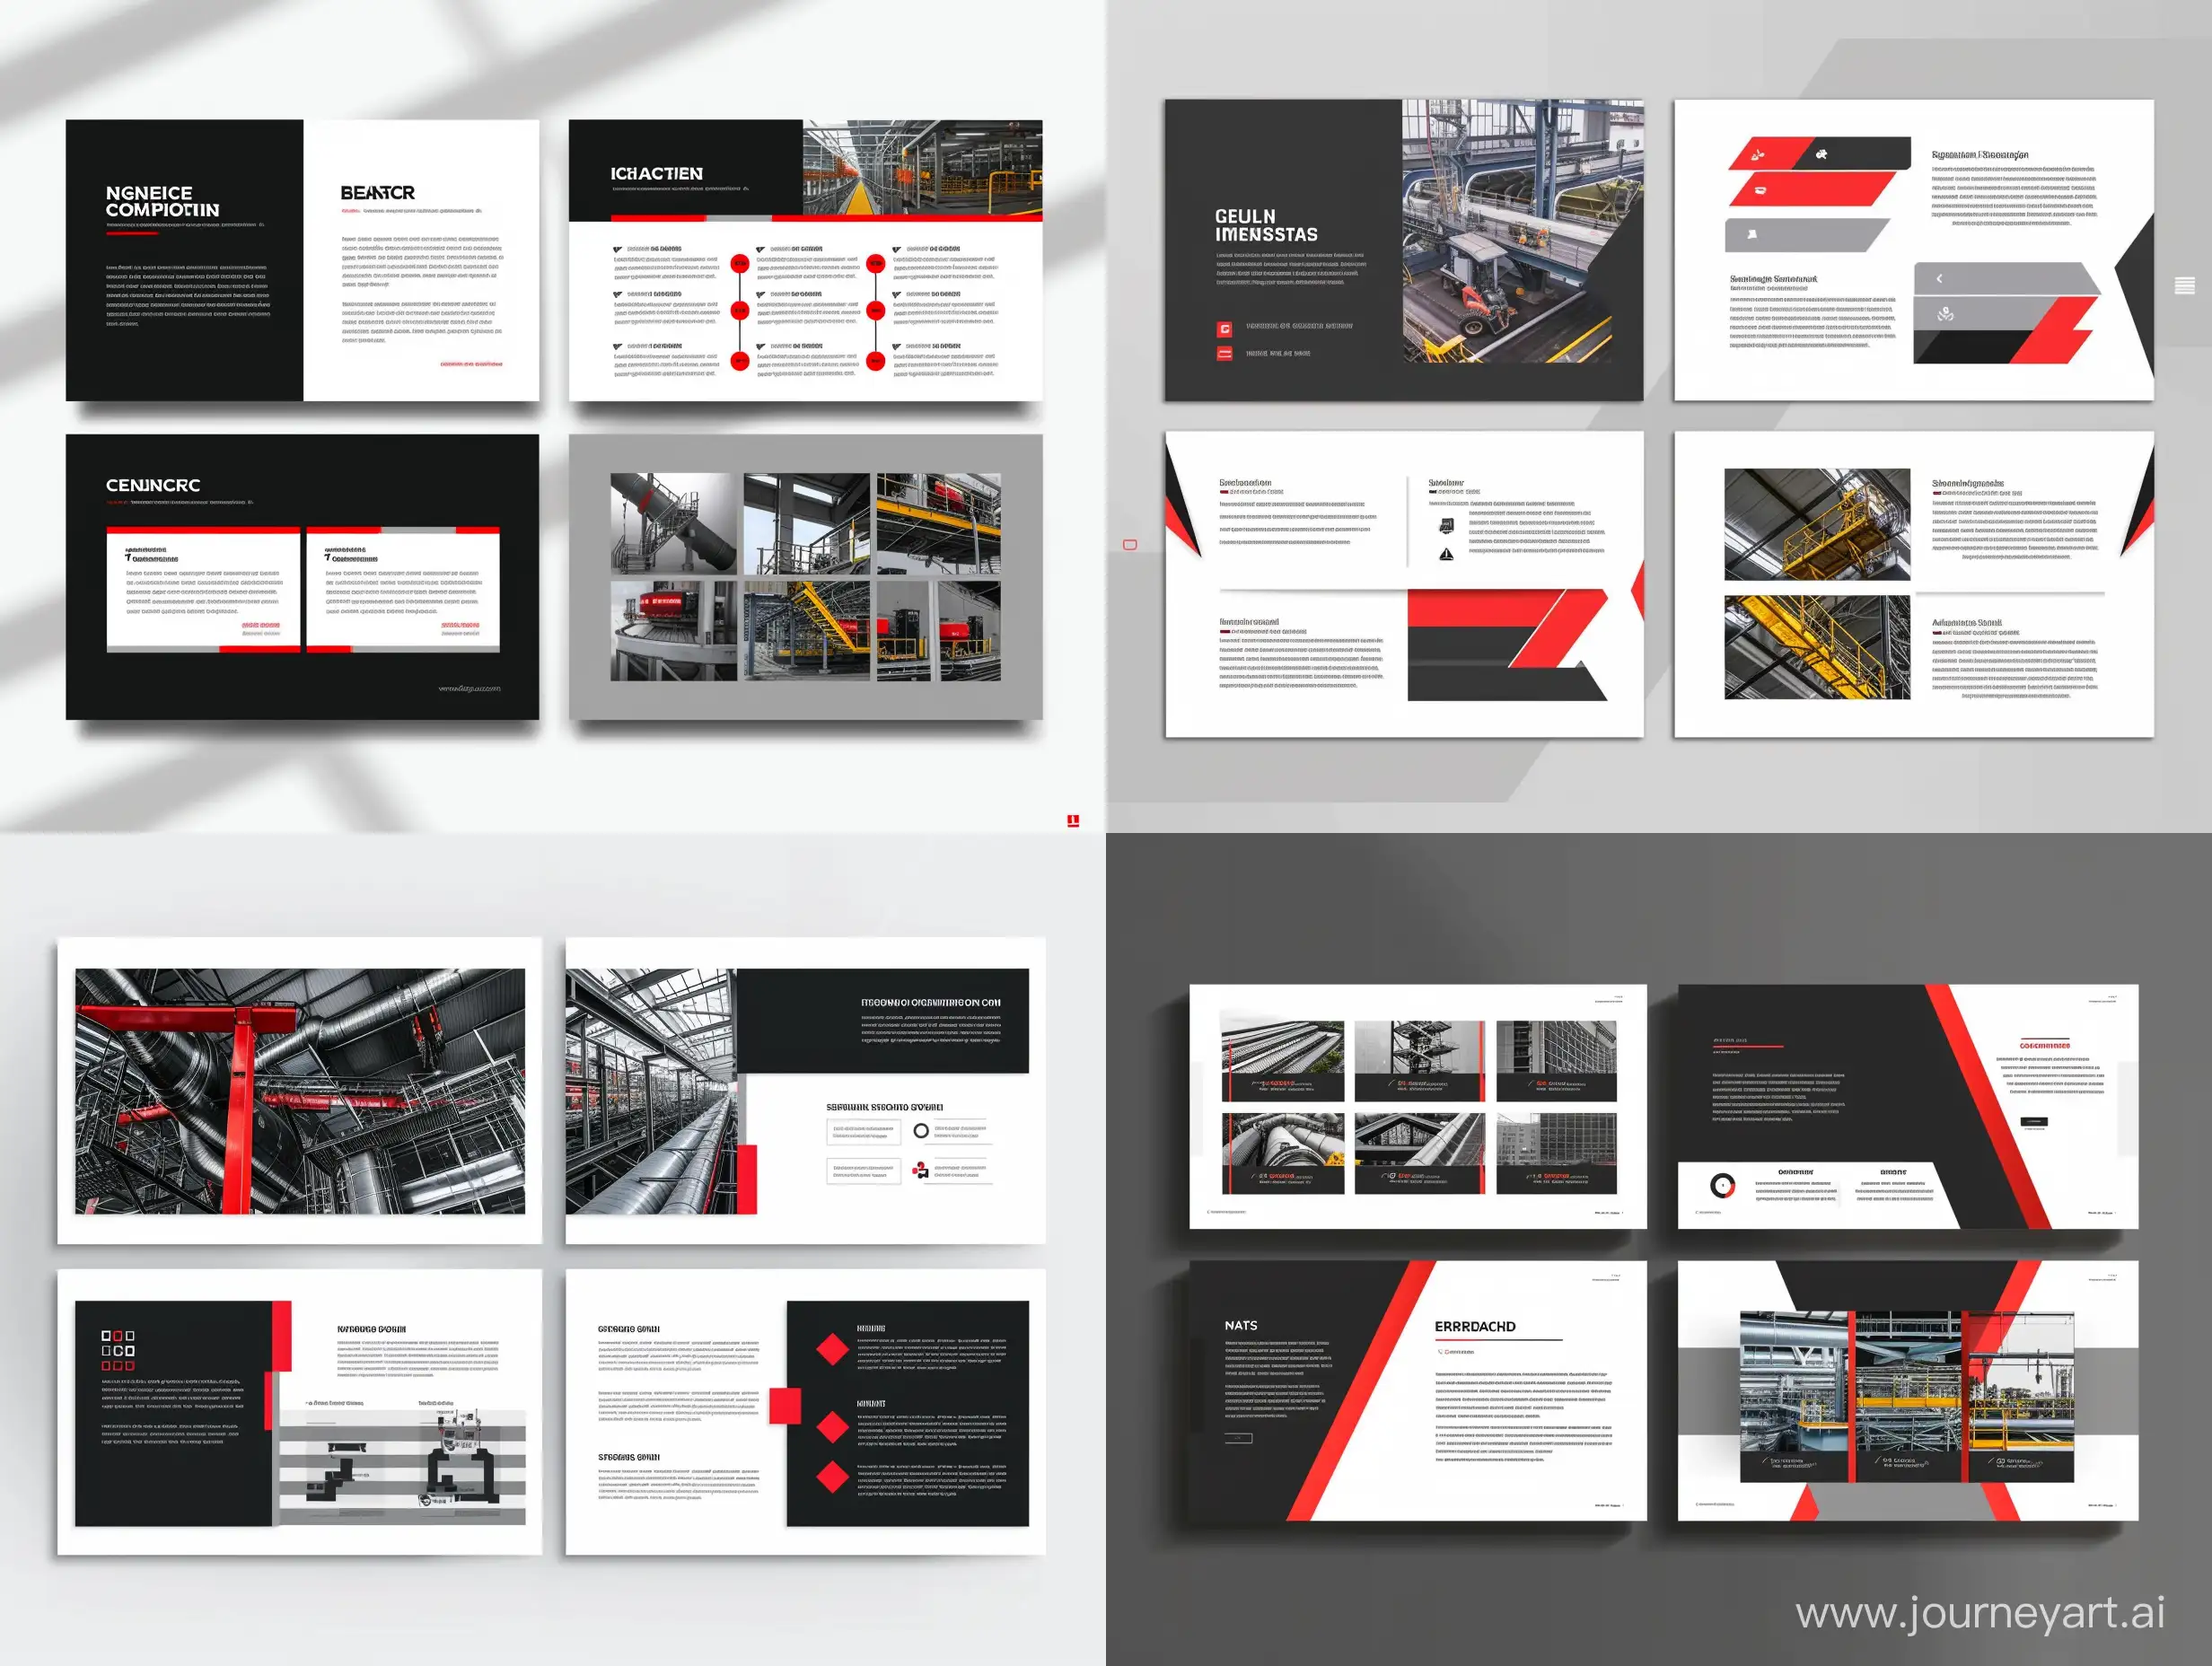 Engineering-Company-Presentation-Modern-Design-in-Black-White-Gray-and-Red